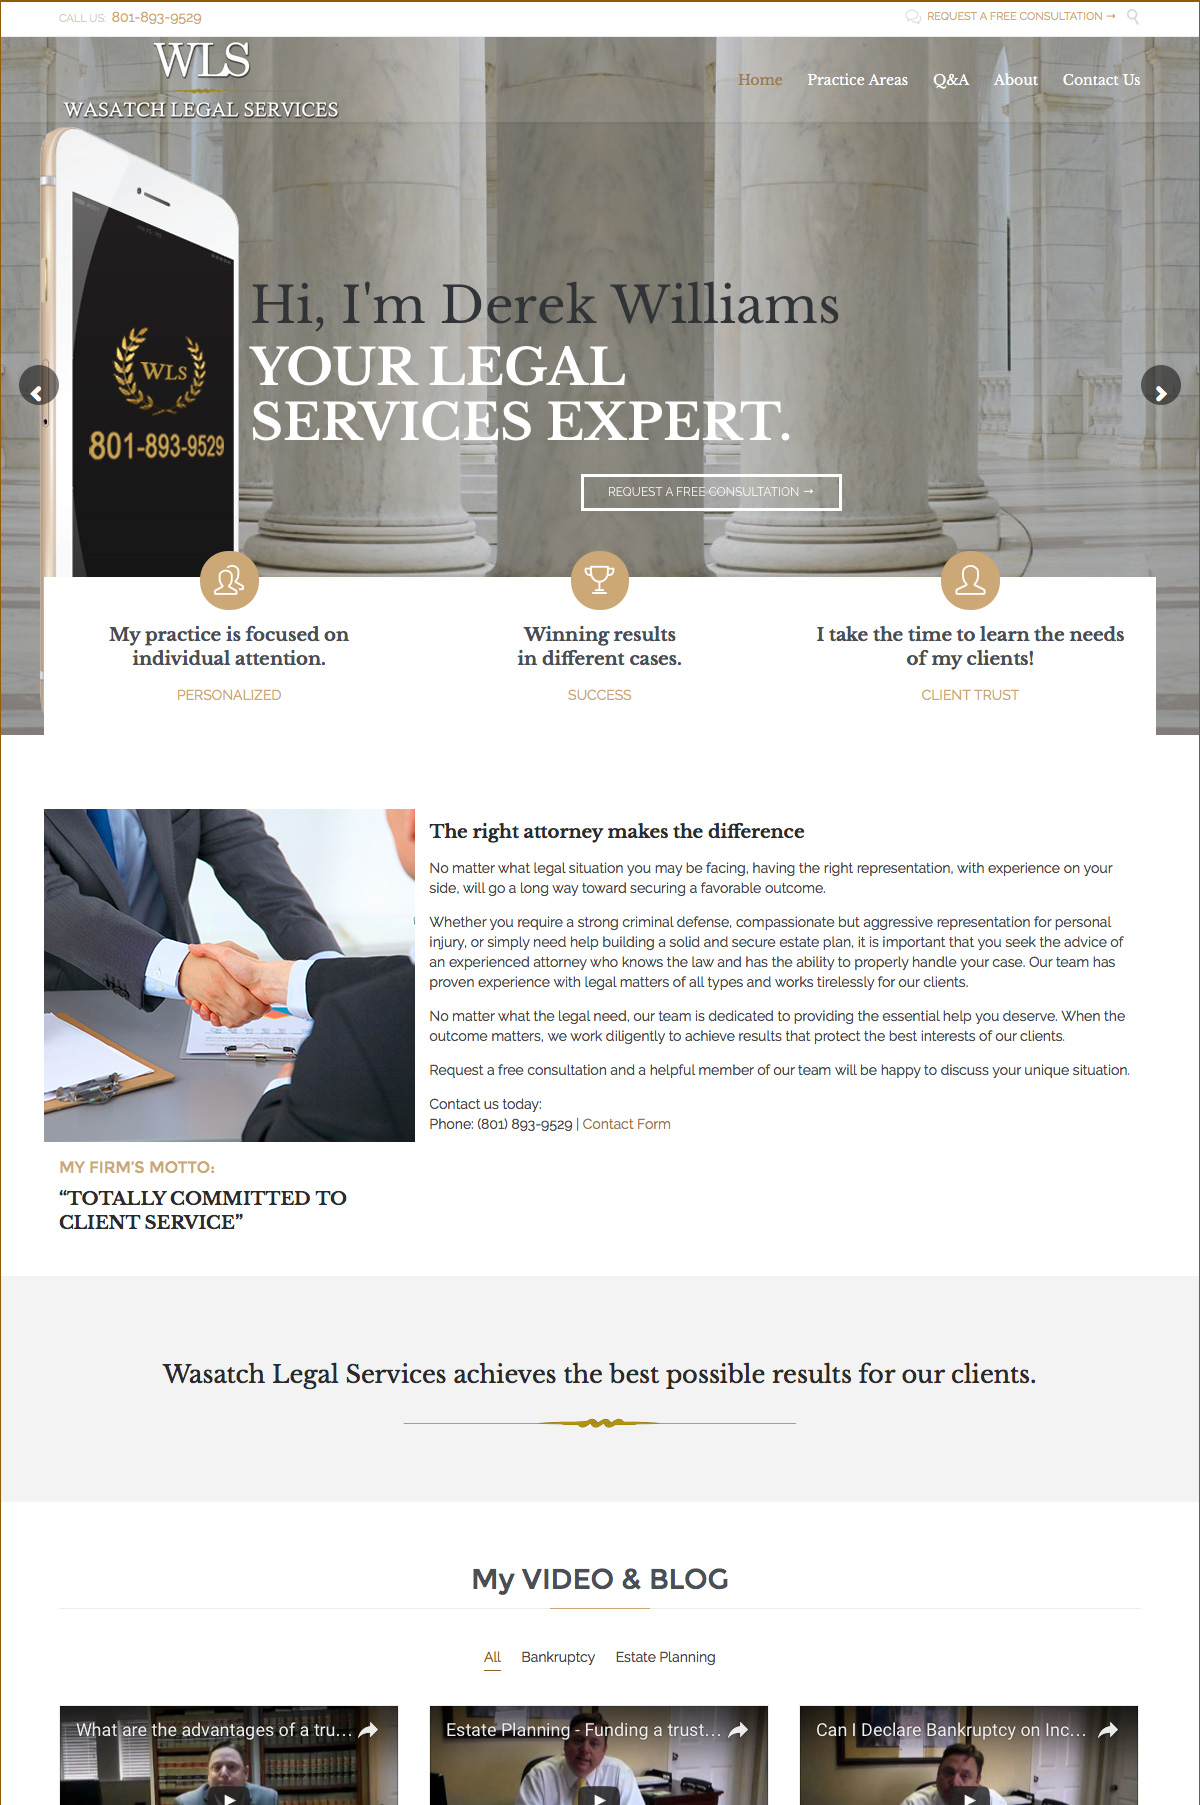 Wasatch Legal Services Corporate Website